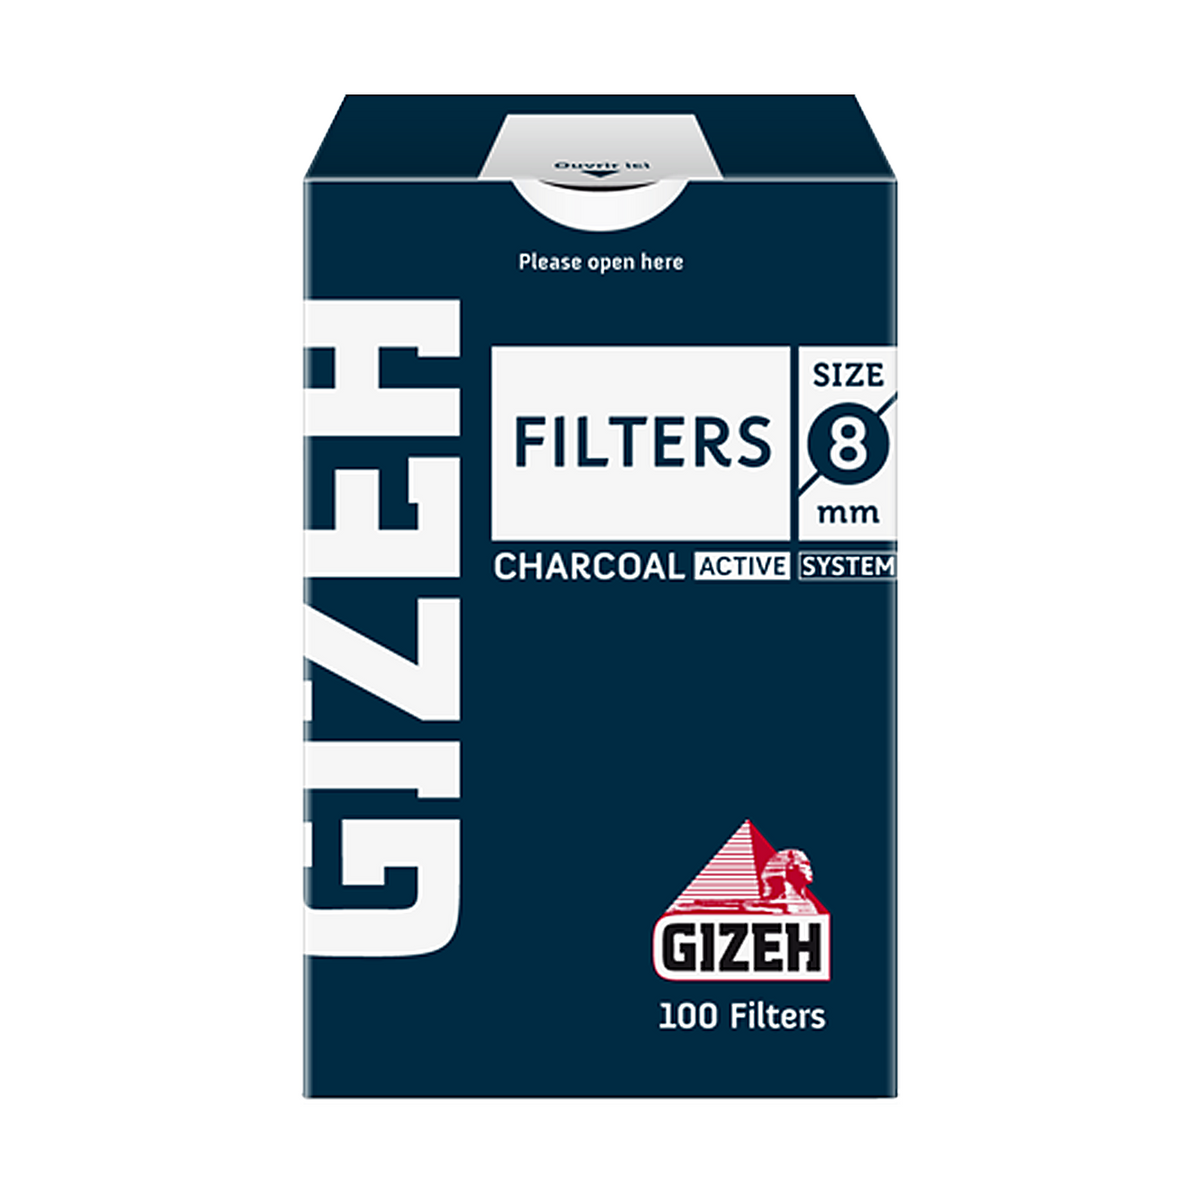 Gizeh Charcoal Filter Tips 8mm –